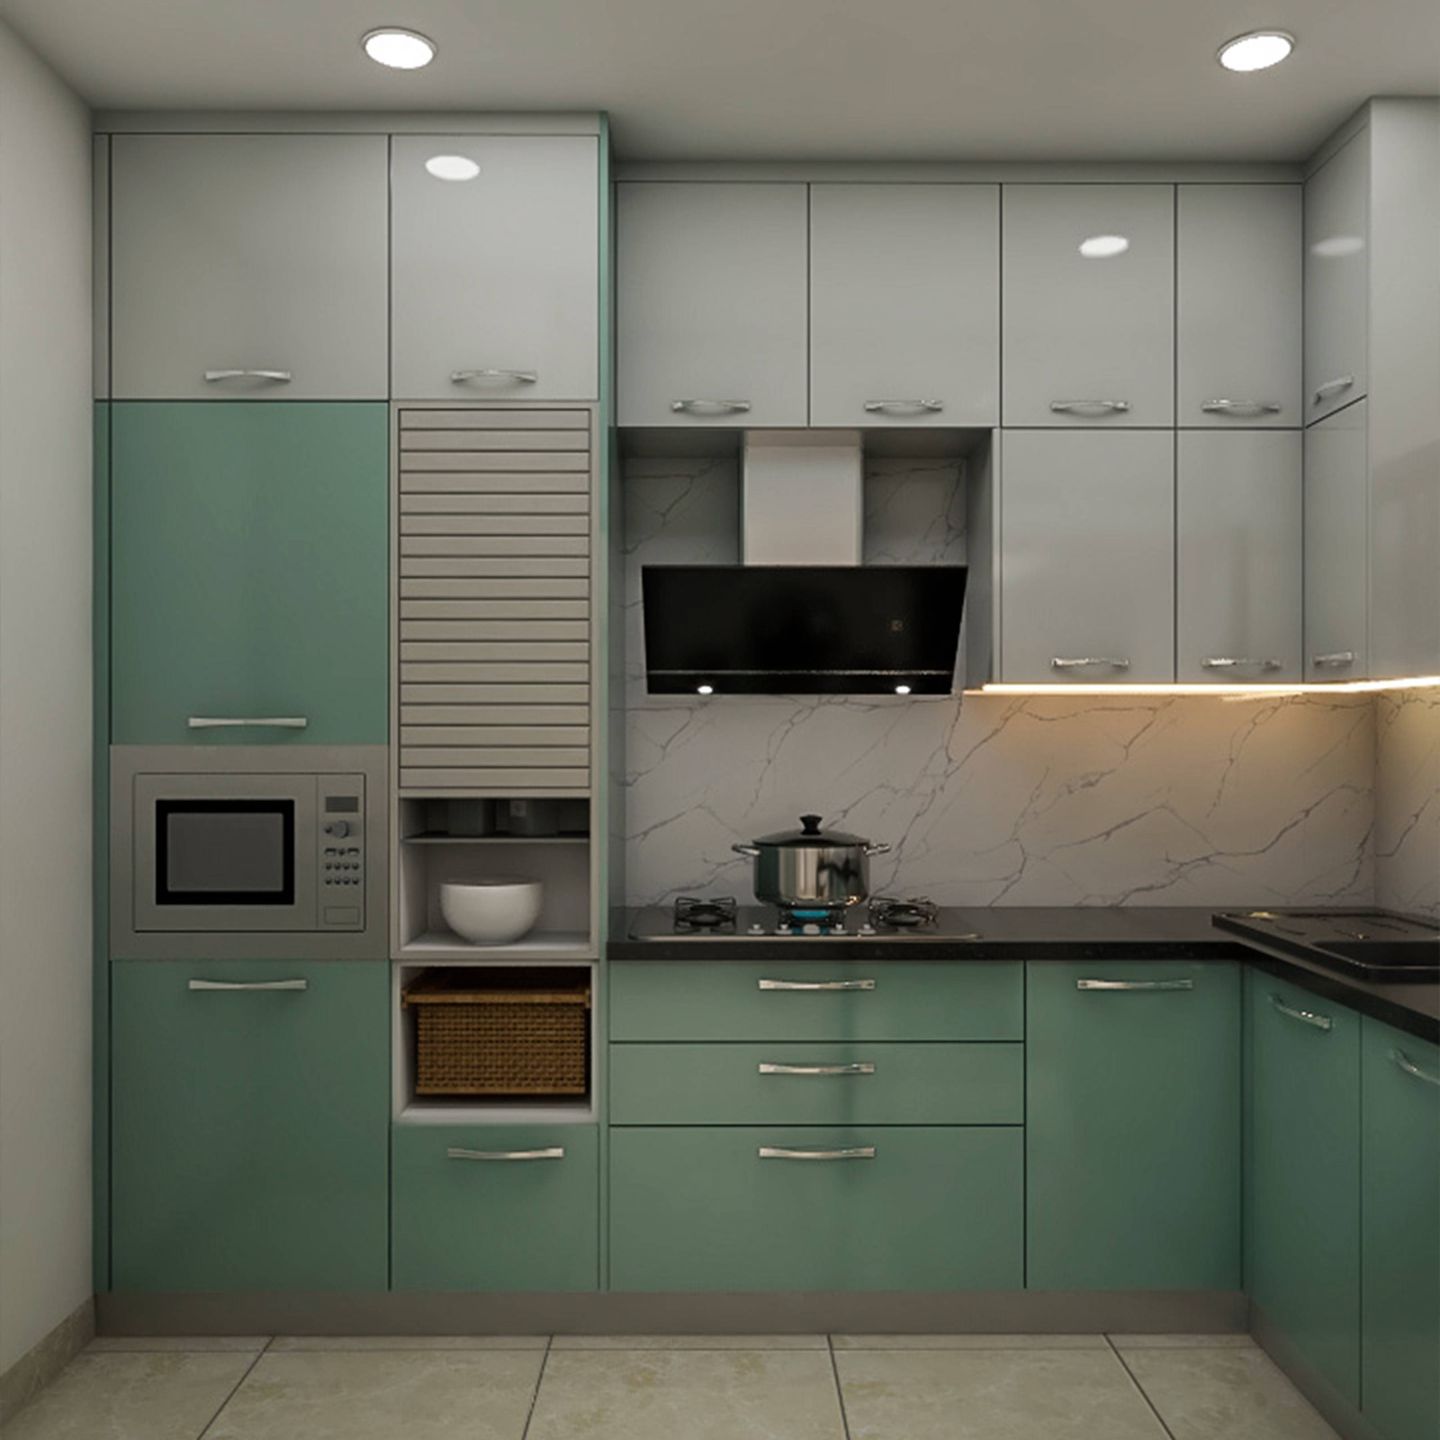 L-Shaped Kitchen With Aqua Green And Grey Storage Units With Aluminium Handles - Livspace